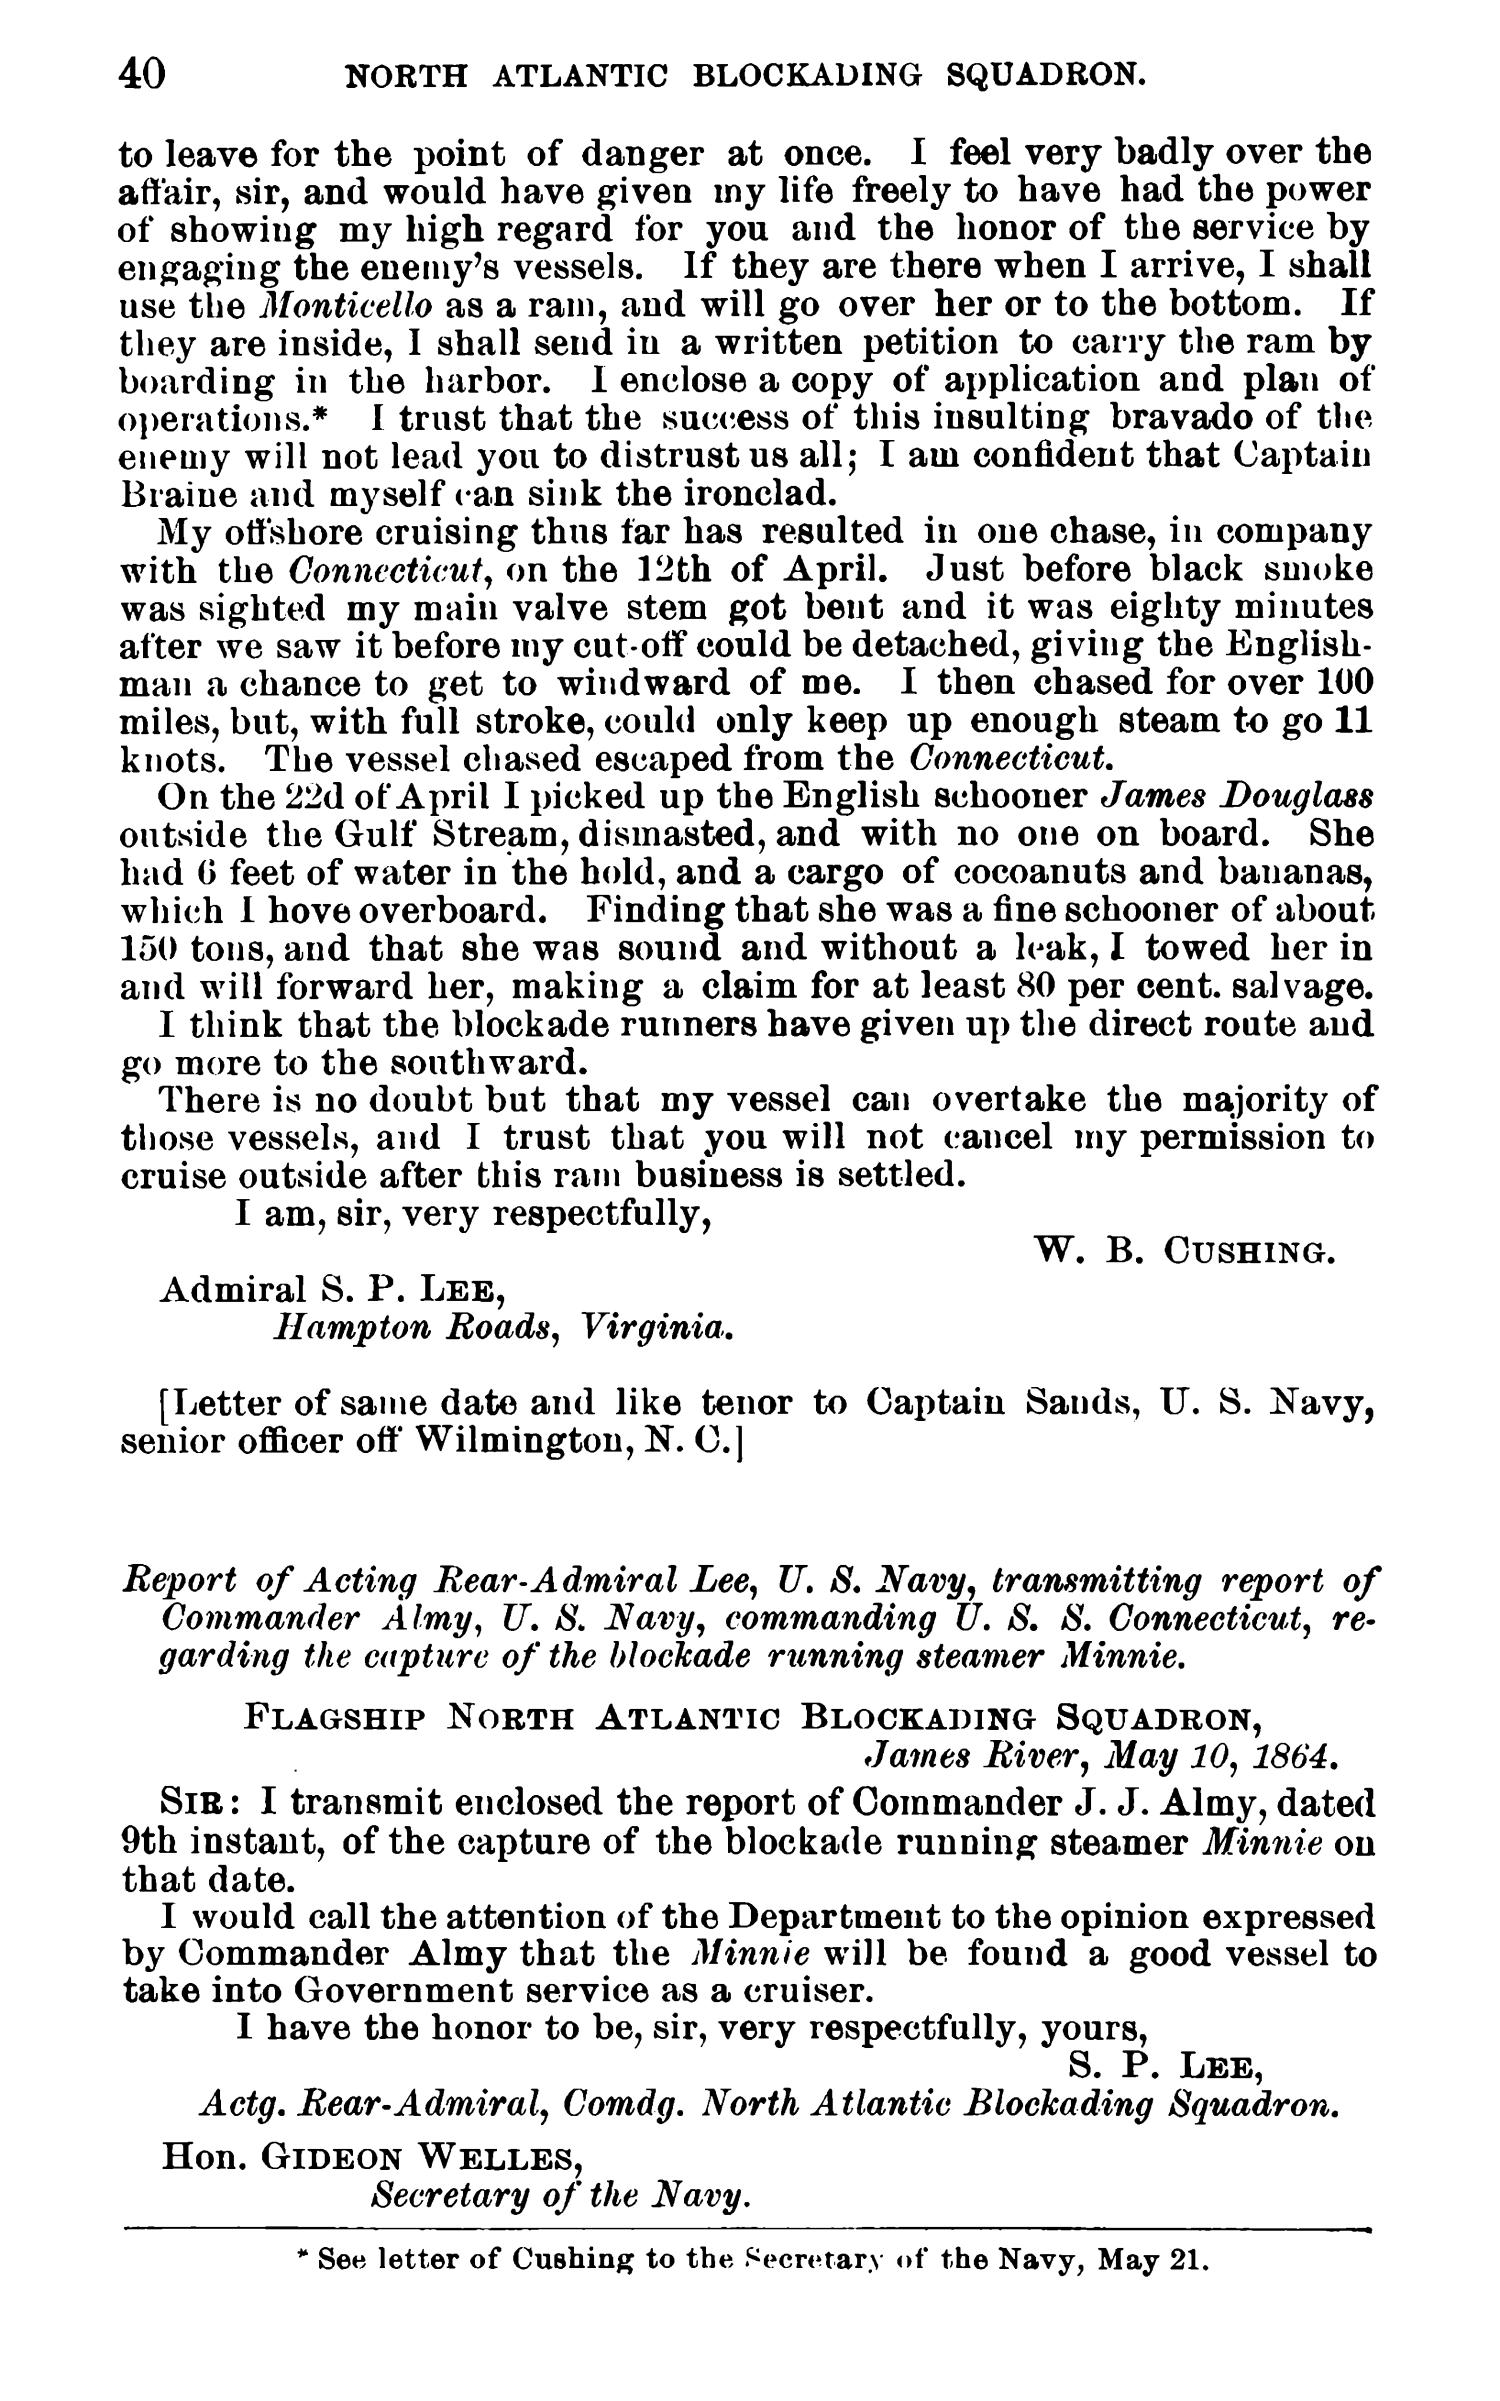 Official Records of the Union and Confederate Navies in the War of the Rebellion. Series 1, Volume 10.
                                                
                                                    40
                                                